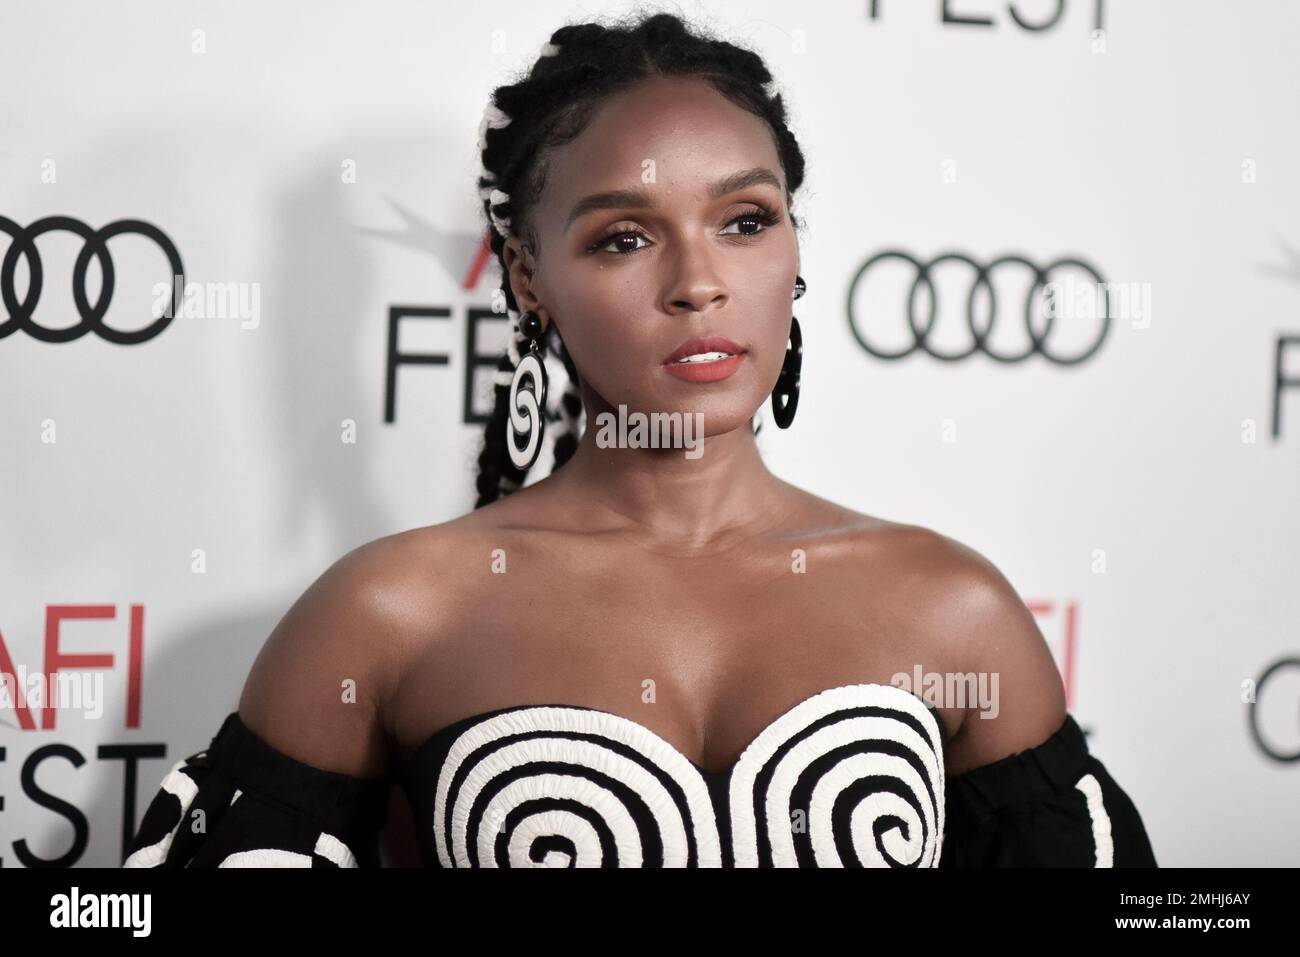 Janelle Monae Attends AFI Fest Opening Night Premiere Of Queen And Slim On Thursday Nov